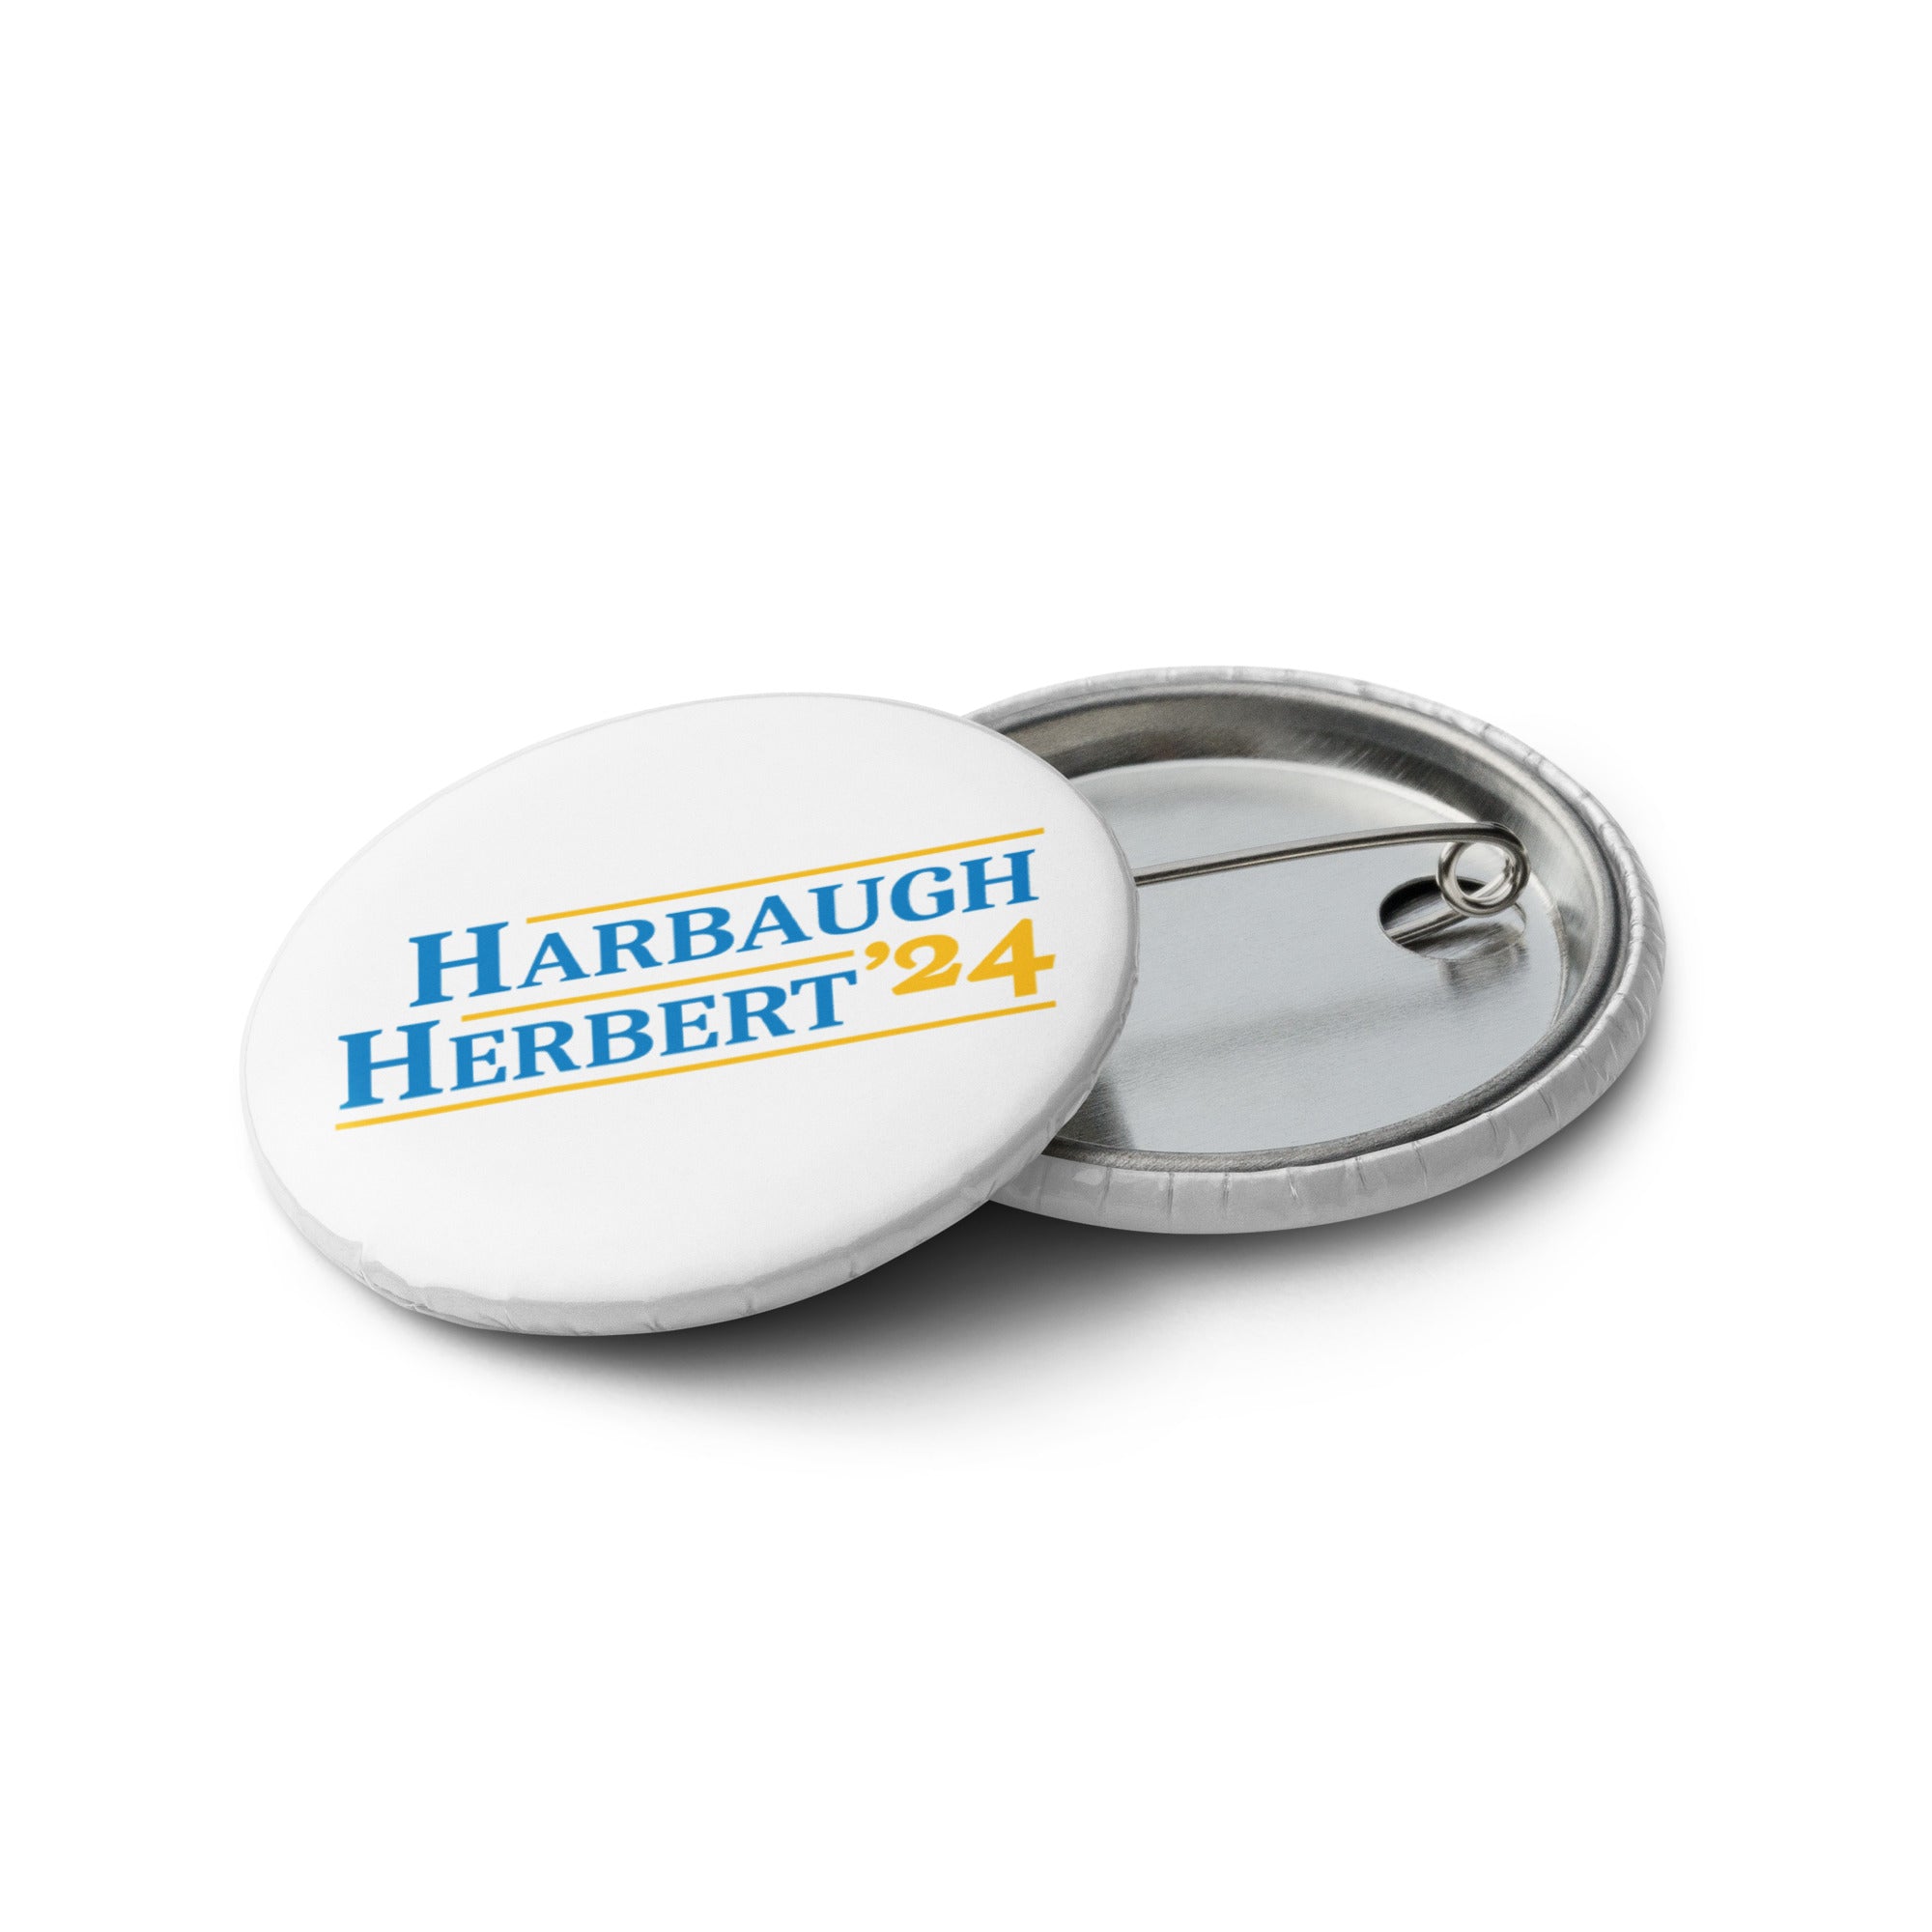 2024 Campaign Set of 5 Buttons